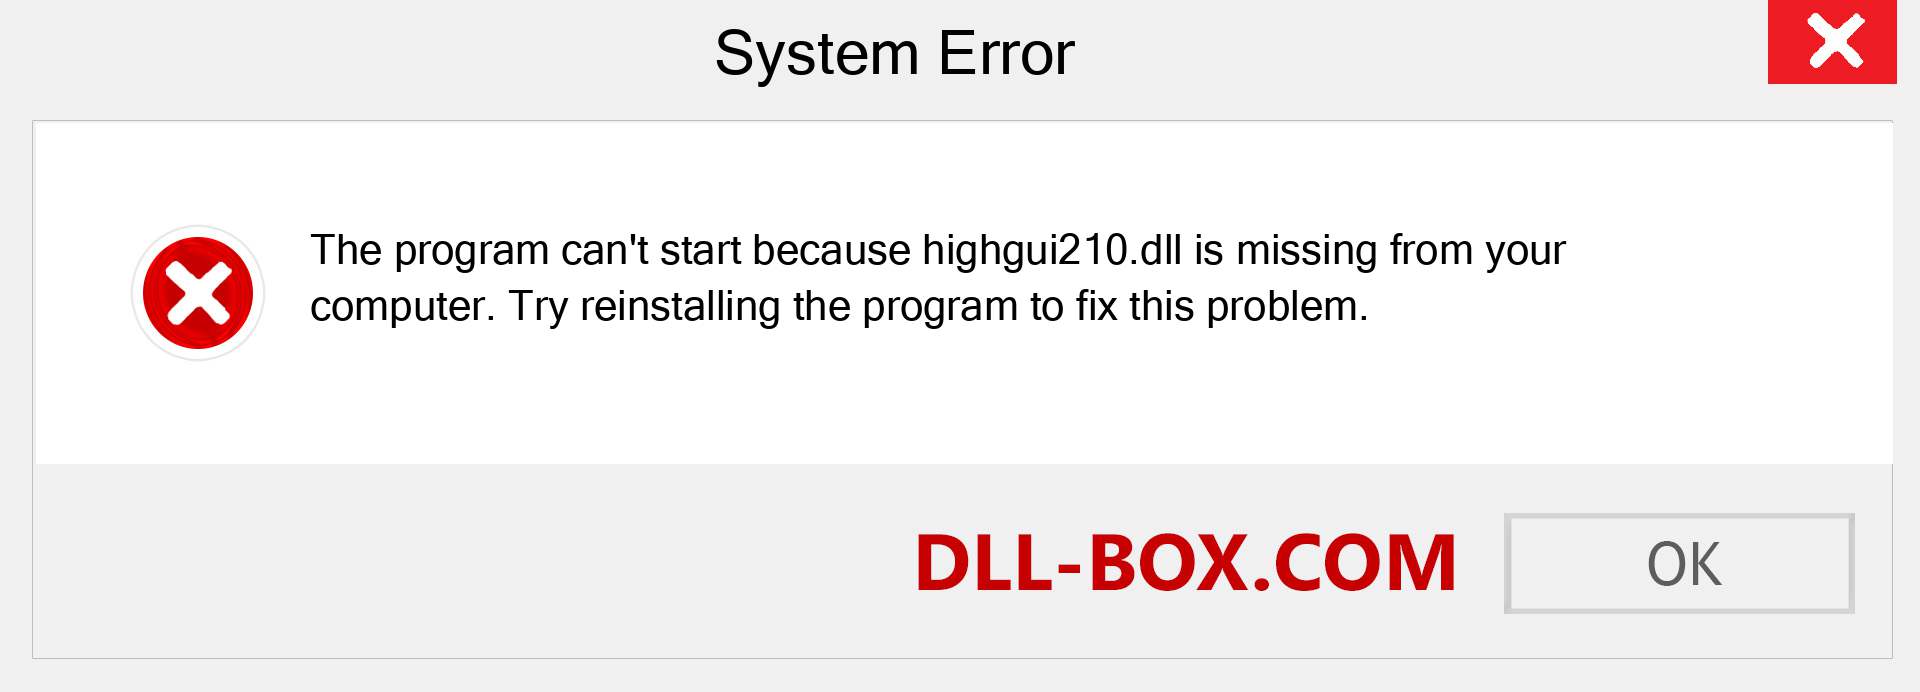  highgui210.dll file is missing?. Download for Windows 7, 8, 10 - Fix  highgui210 dll Missing Error on Windows, photos, images